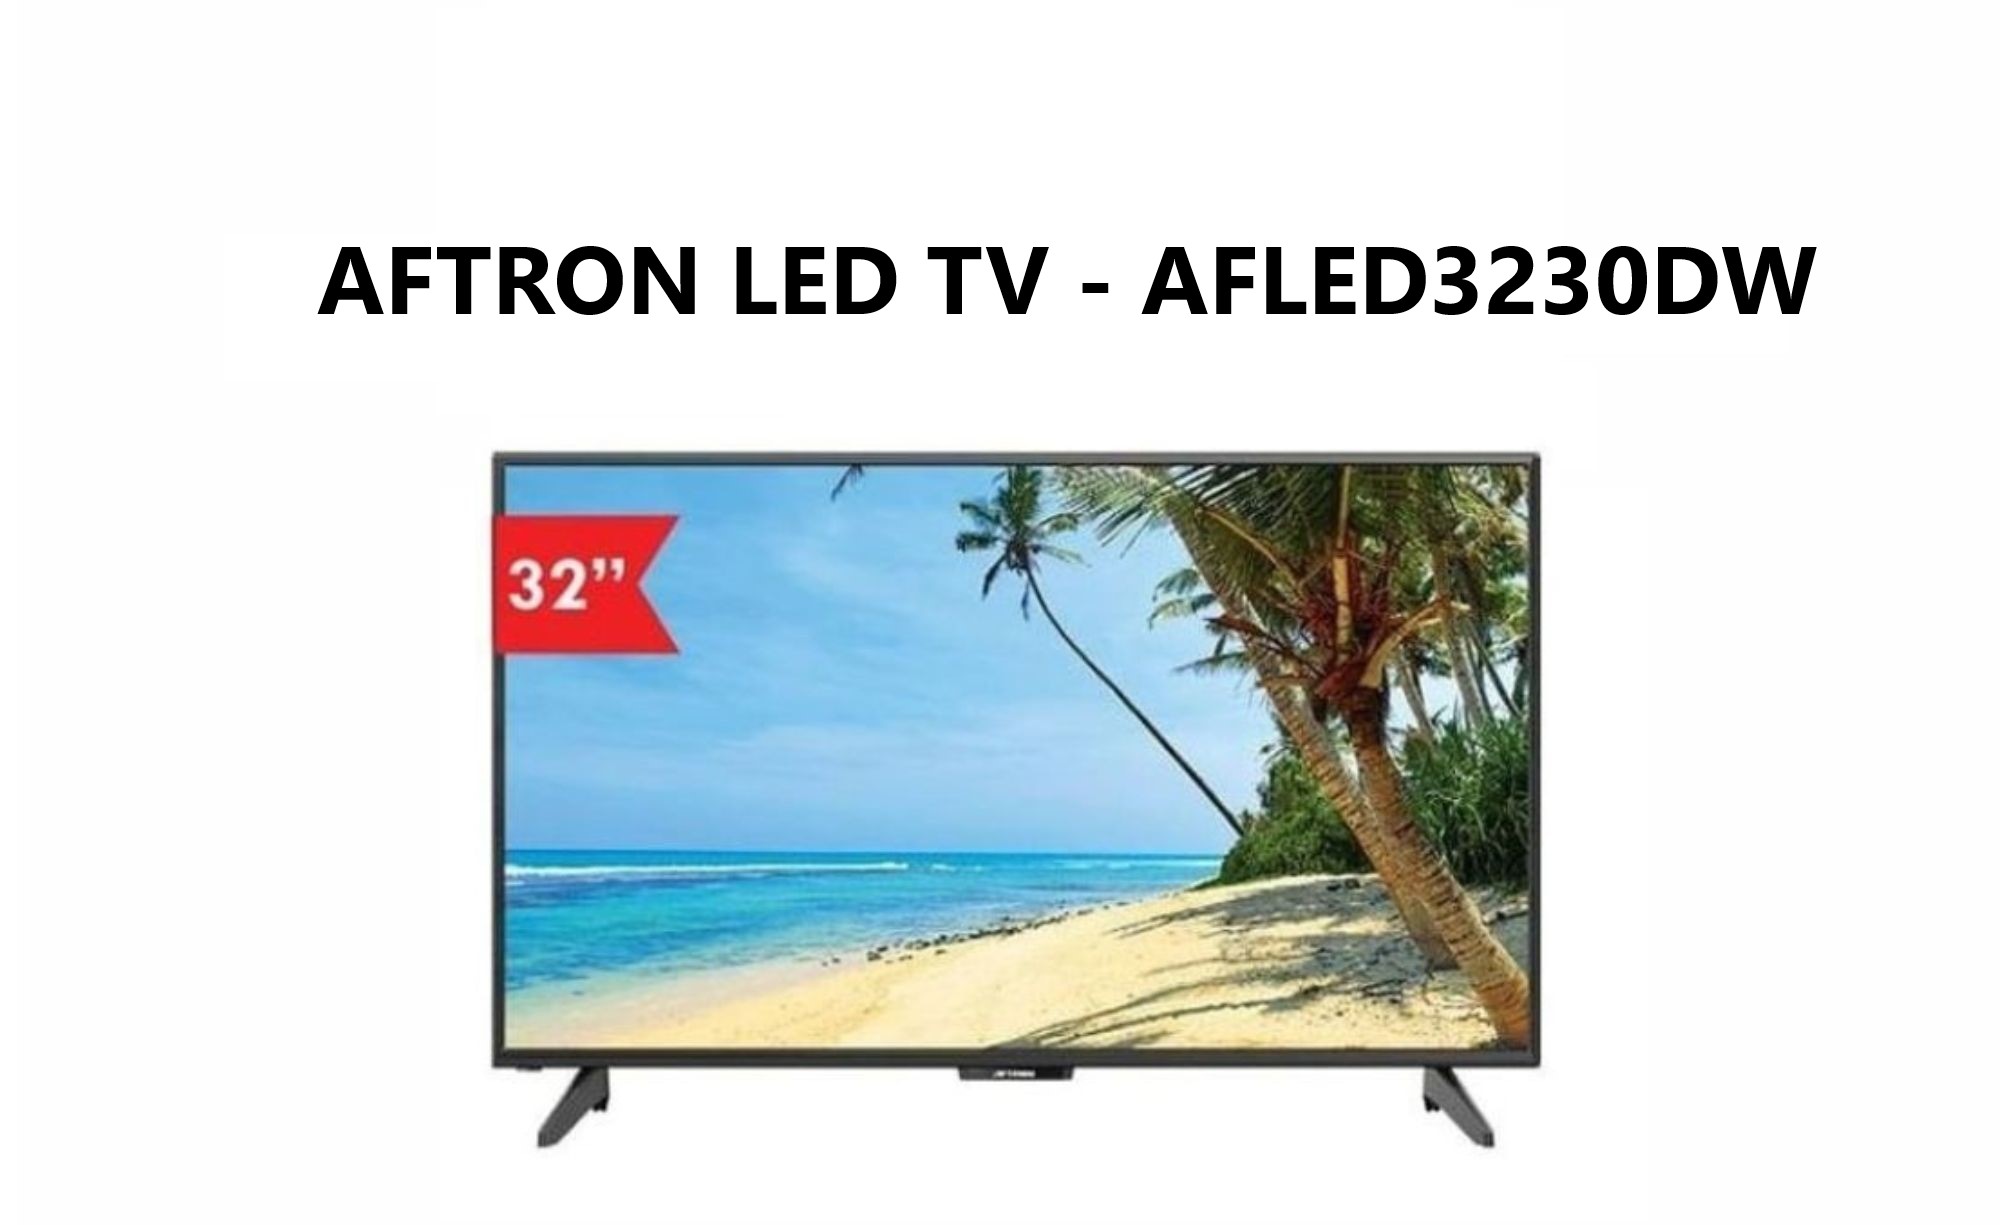 Aftron AFLED3230DW | aftron tv 32 inch
